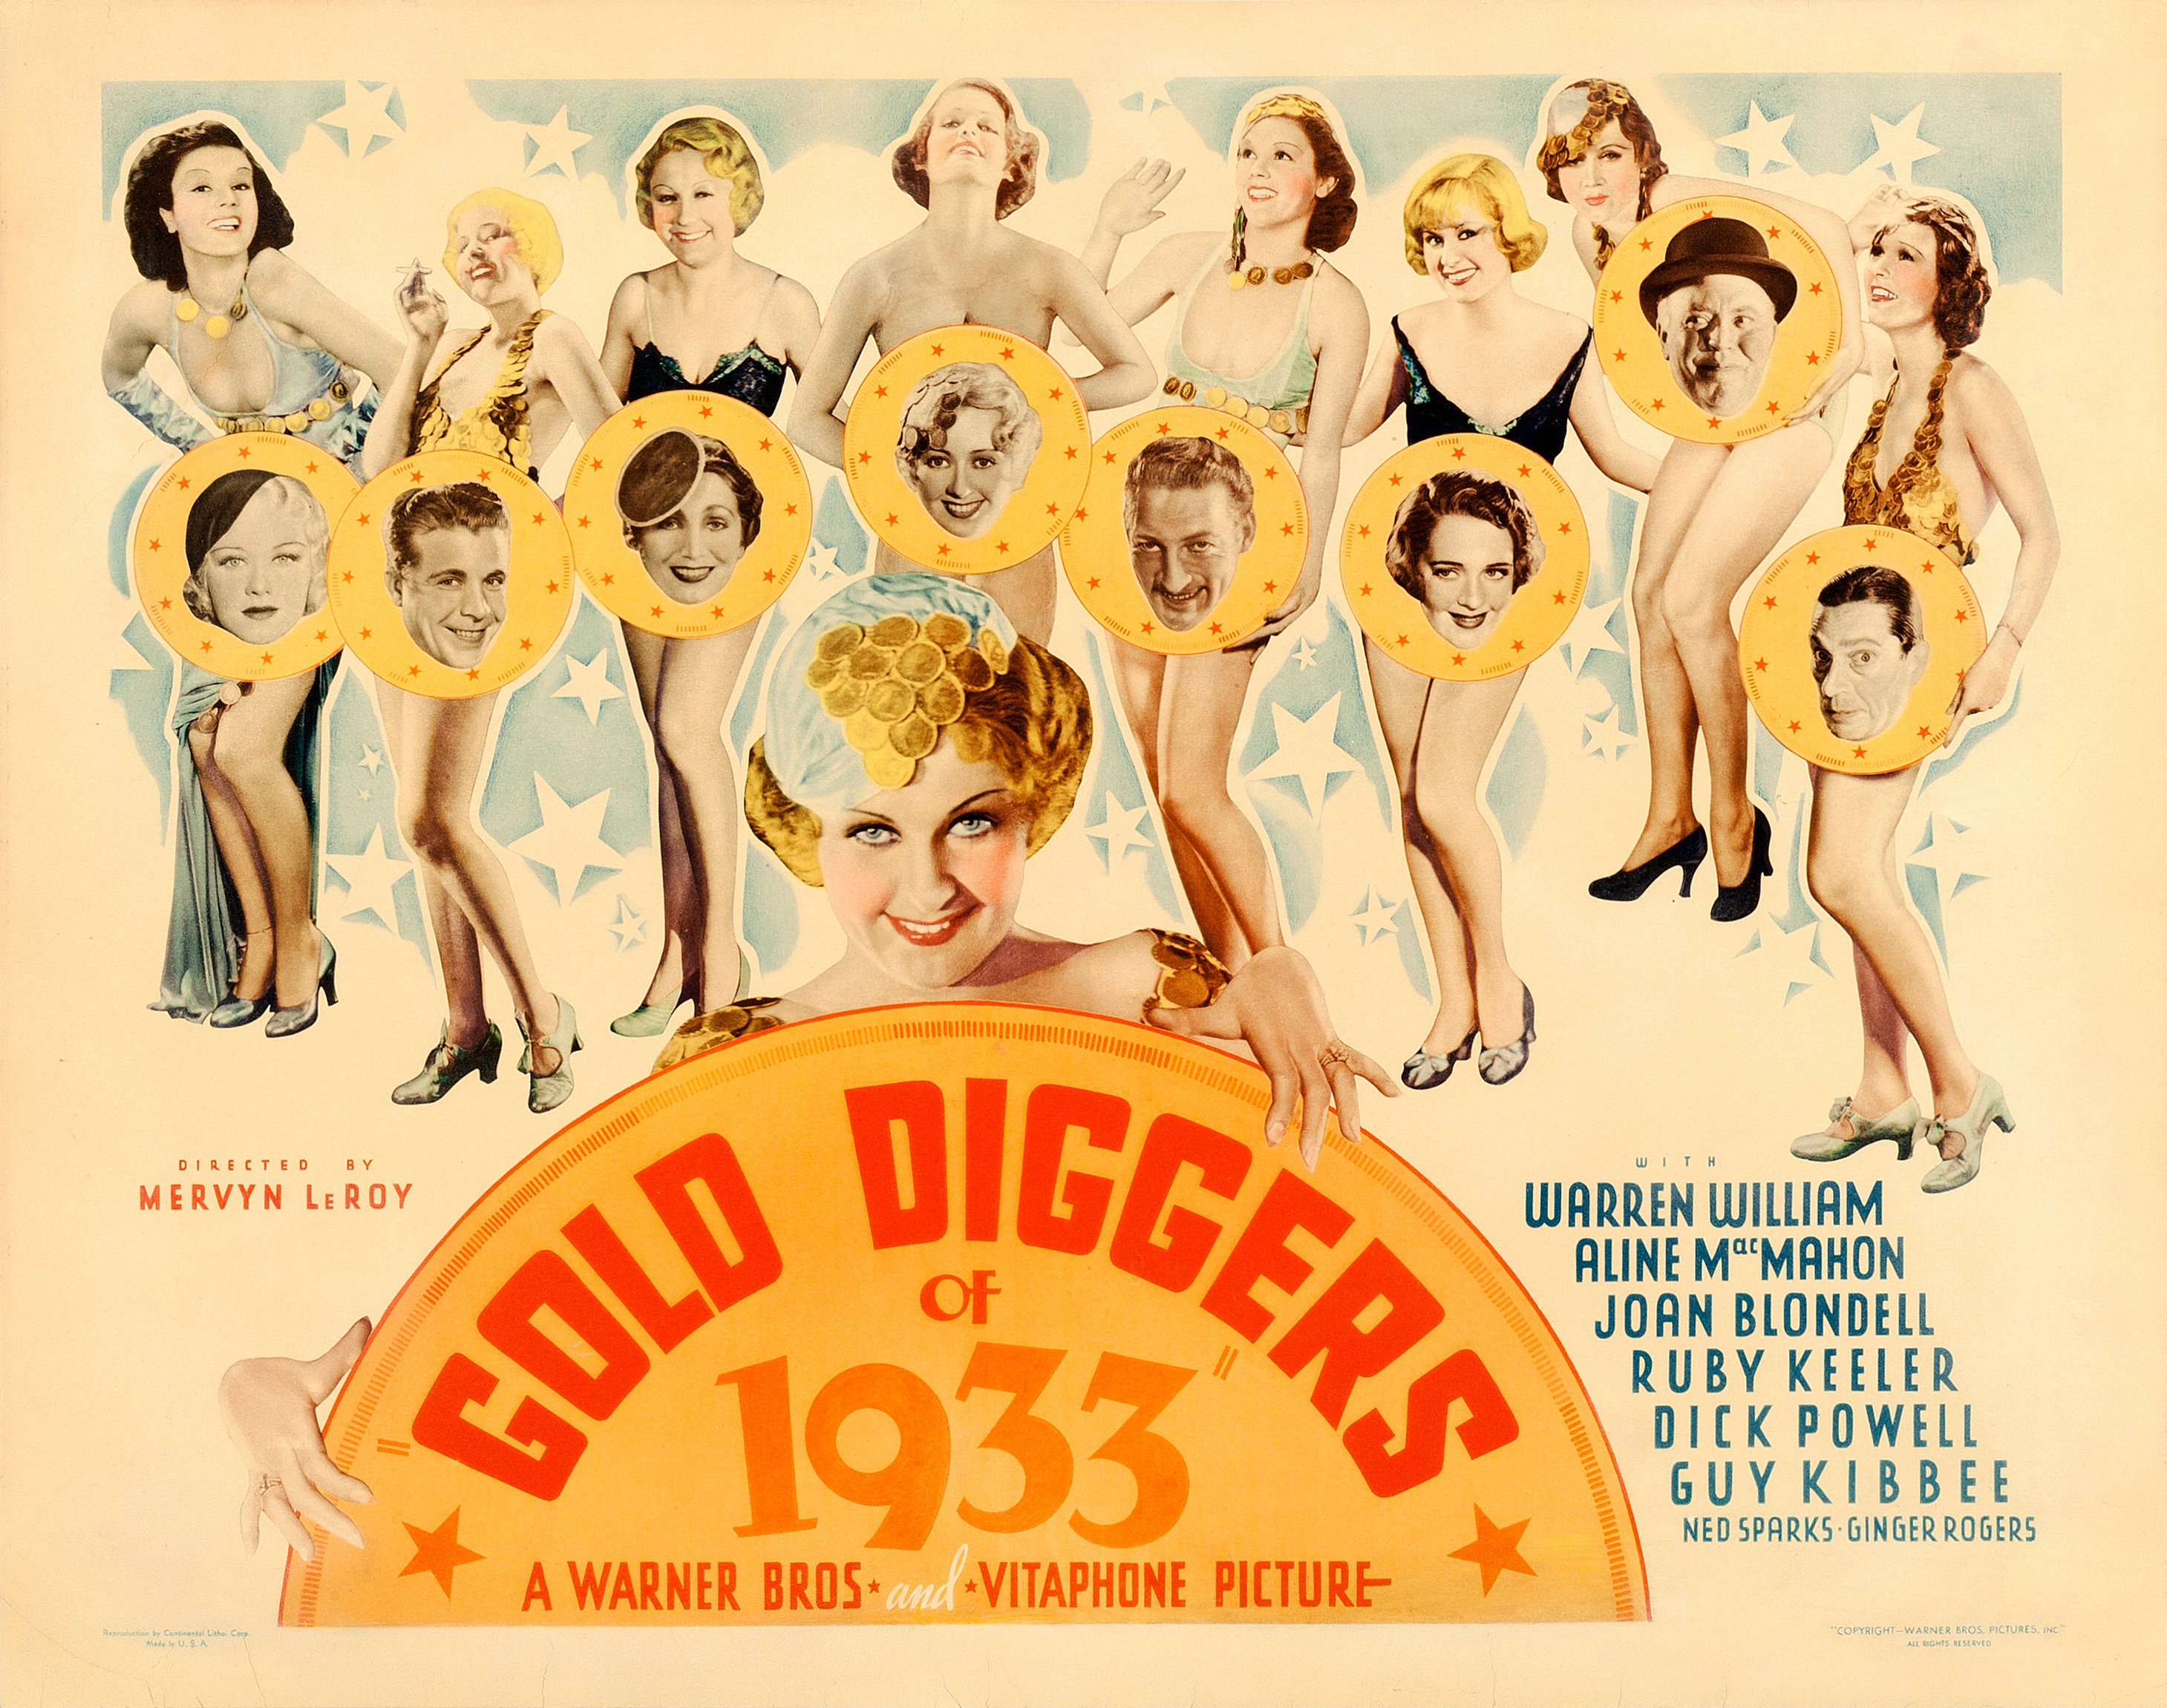 The musical magic of Gold Diggers of 1933 at 90